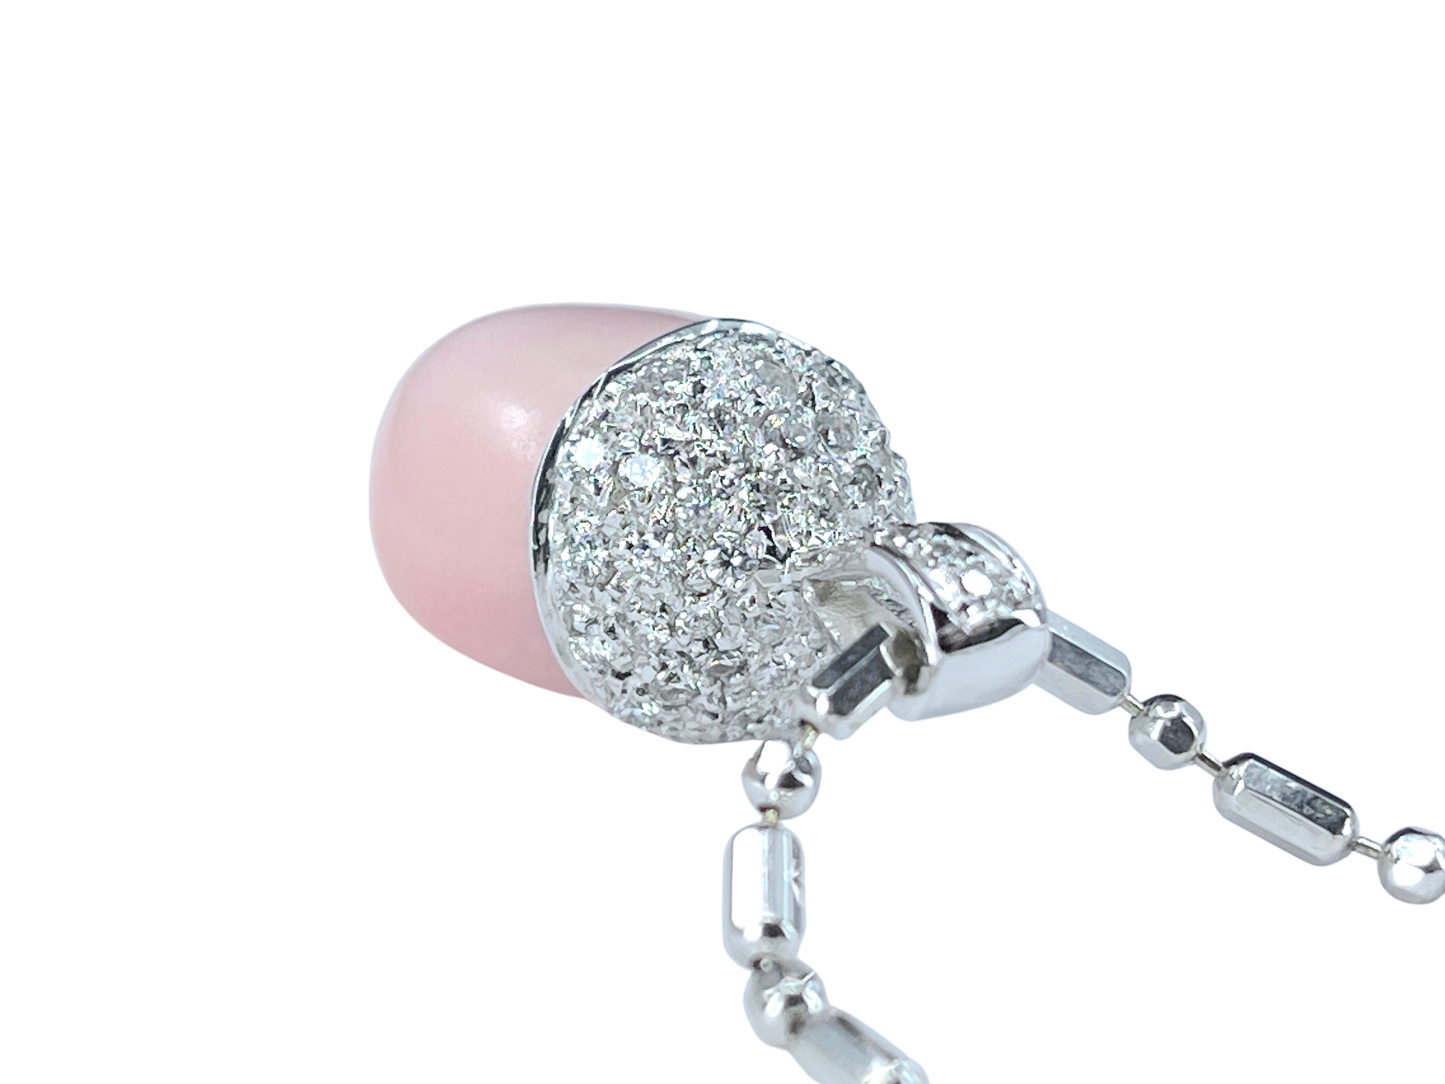 GIA 17.54 ct. Natural Pink Conch Pearl & Diamond Necklace in 18K White Gold